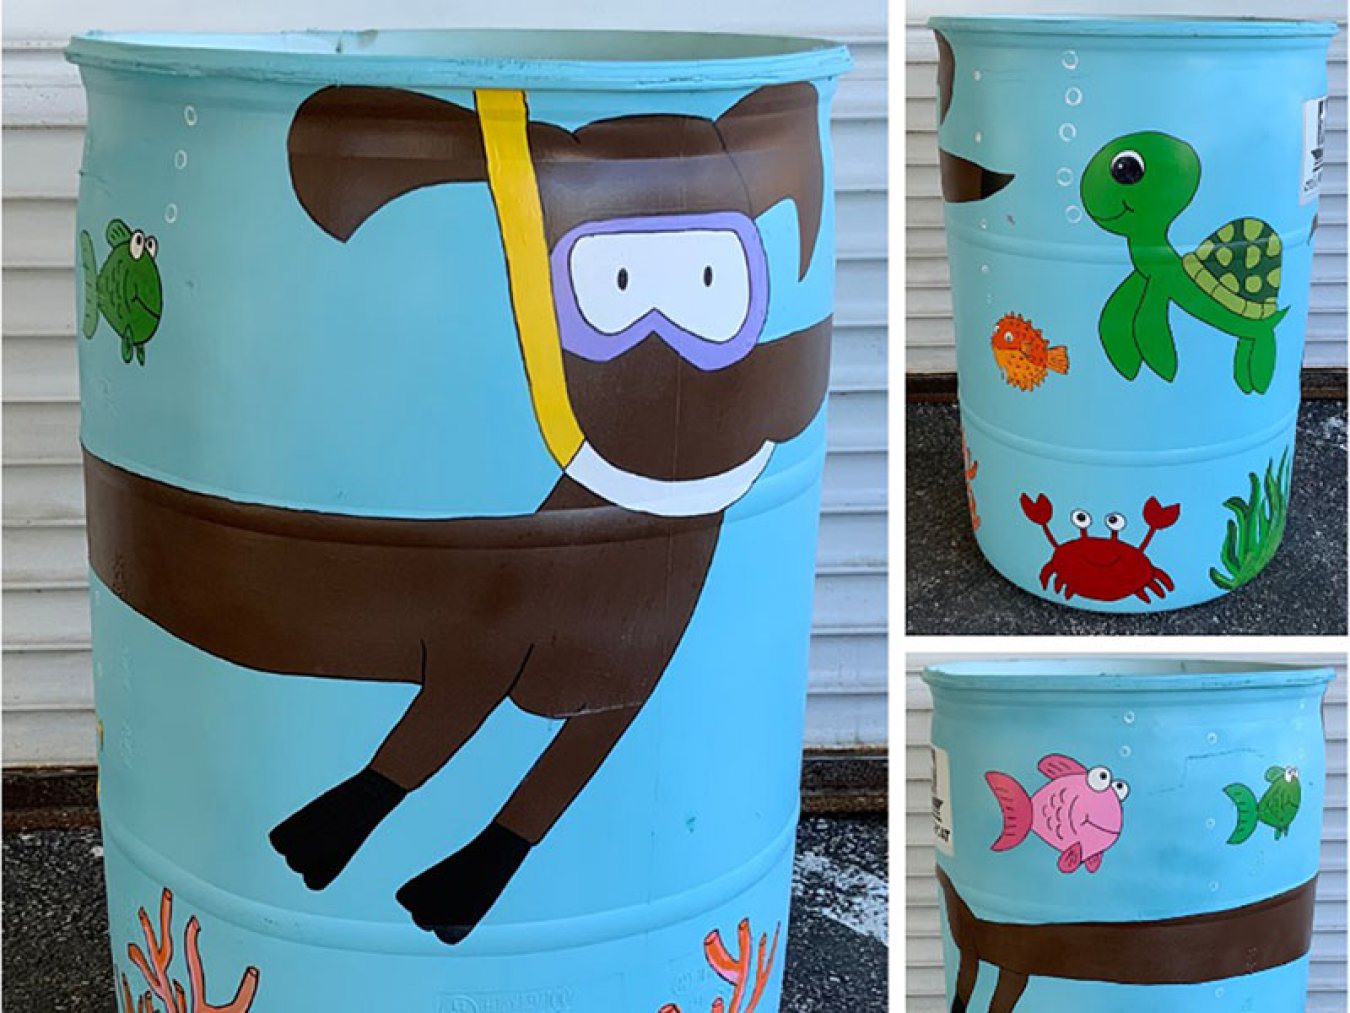 Beautify the Bucket - Painted Trash Cans